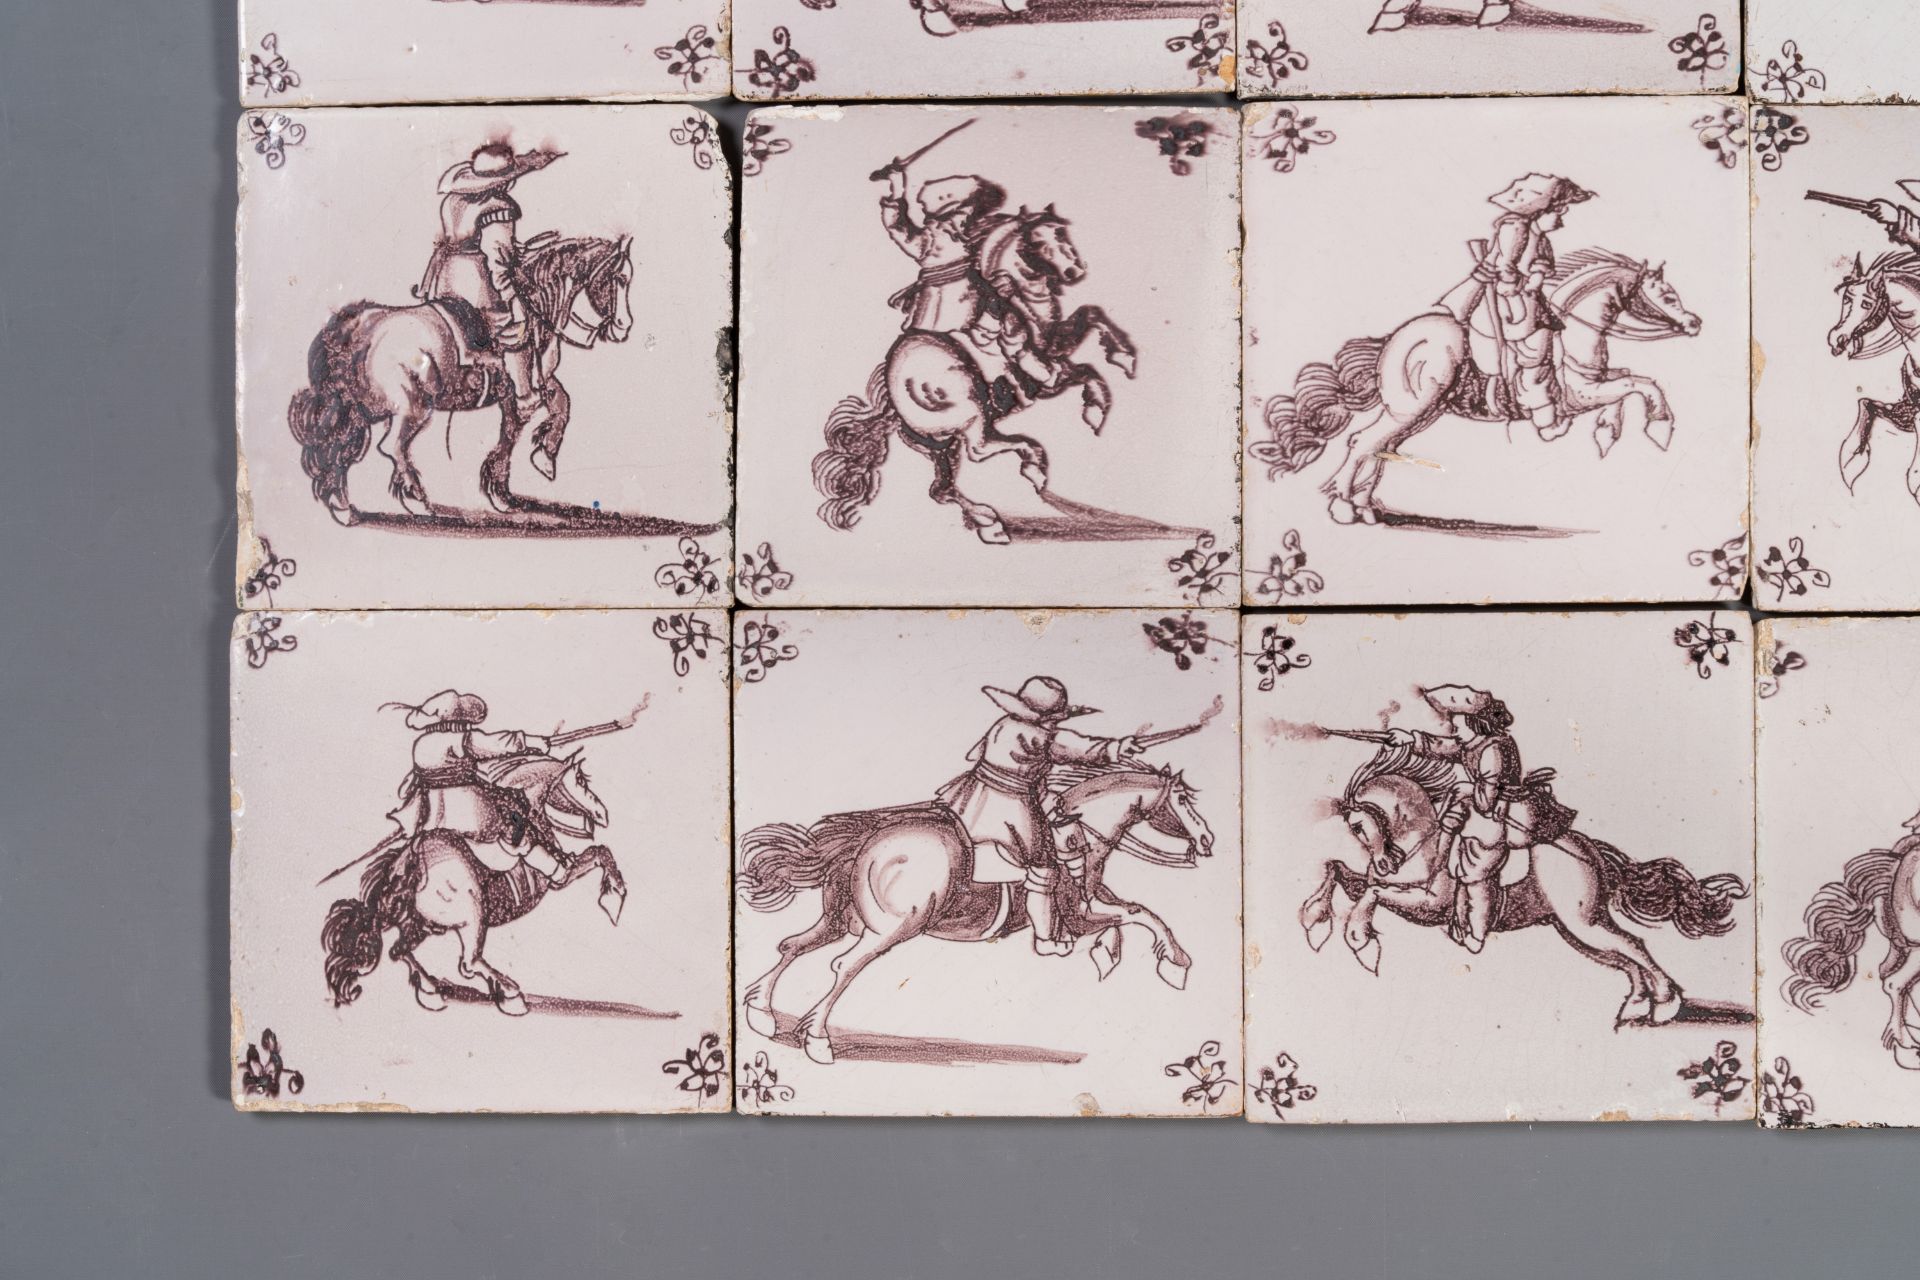 Fifteen Dutch Delft manganese tiles with horse riders, late 17th C. - Bild 12 aus 13